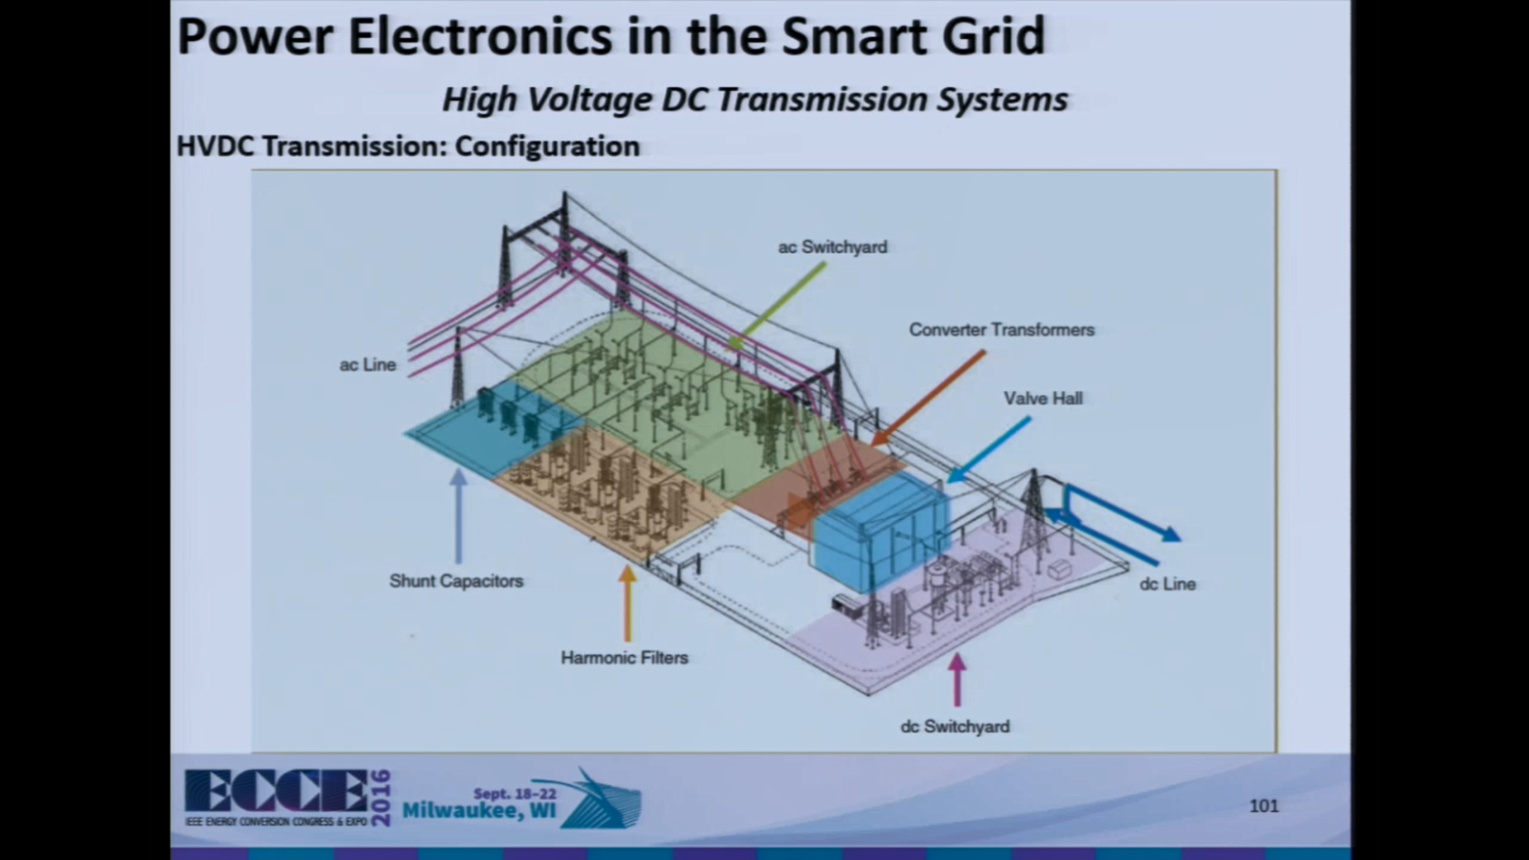 Renewables, Energy Storage and Power Electronics as Enabling Technologies for the Smart Grid Part II